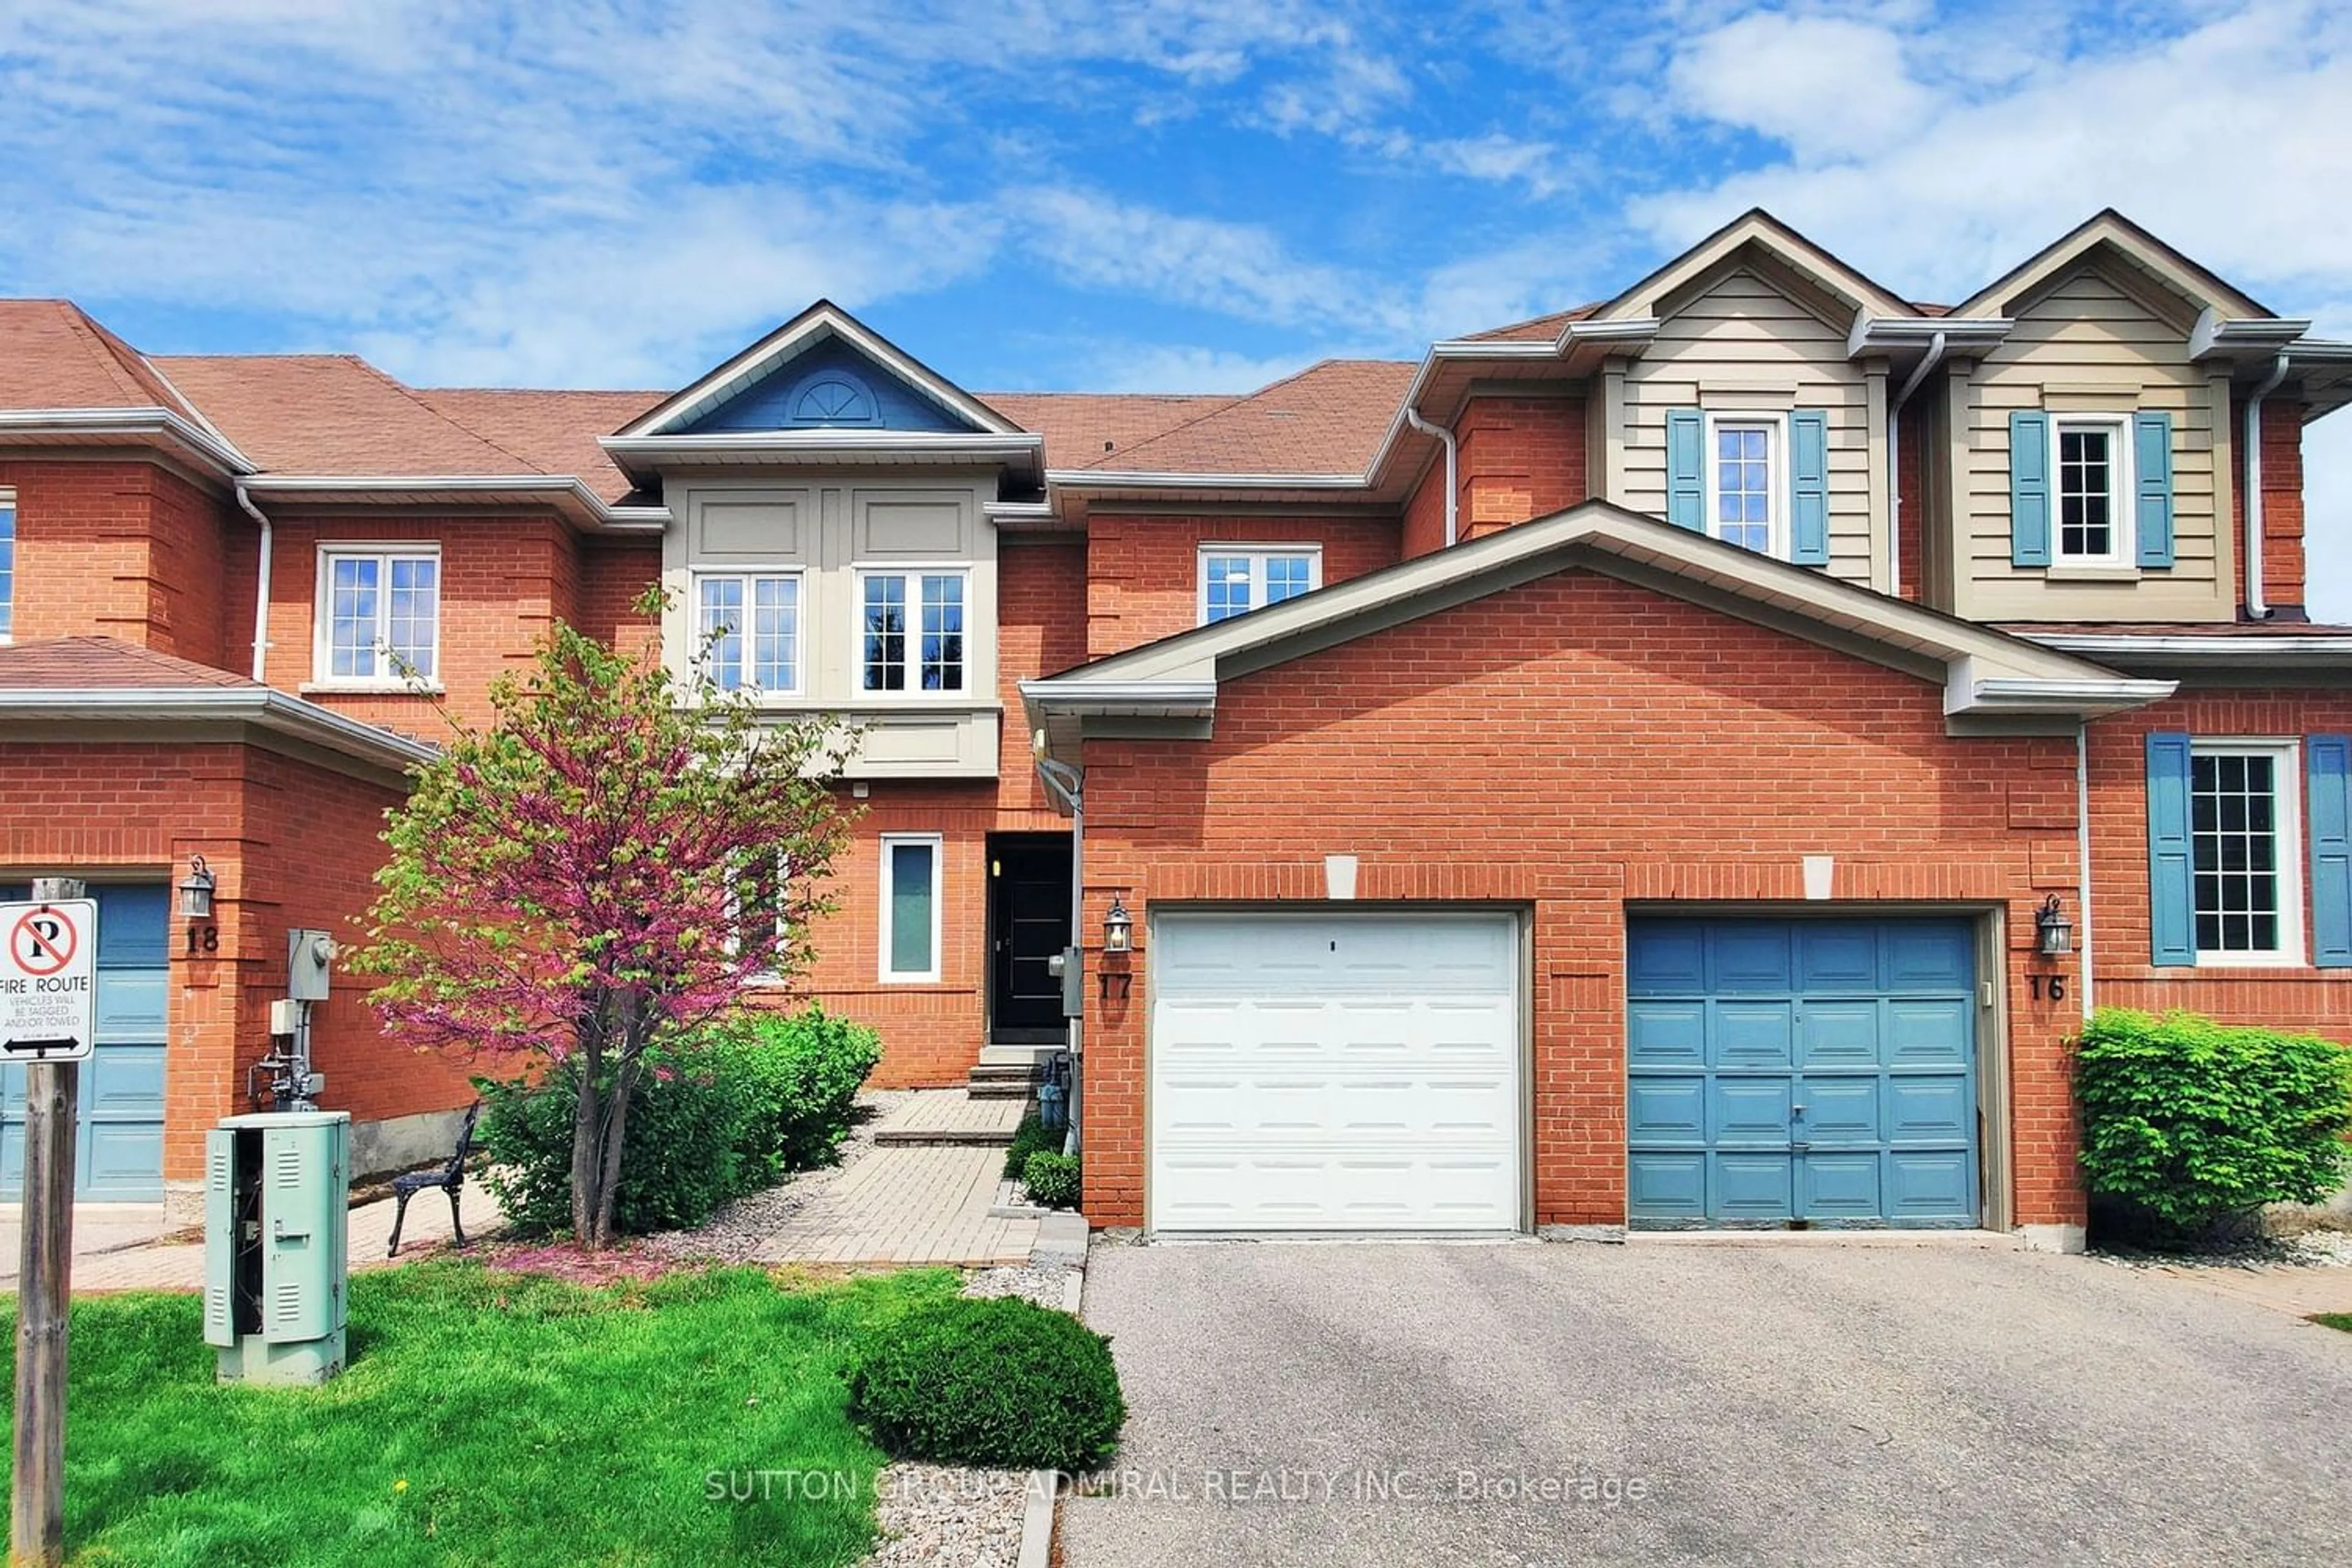 Home with brick exterior material for 2 Mary Gapper Cres #17, Richmond Hill Ontario L4C 0J4